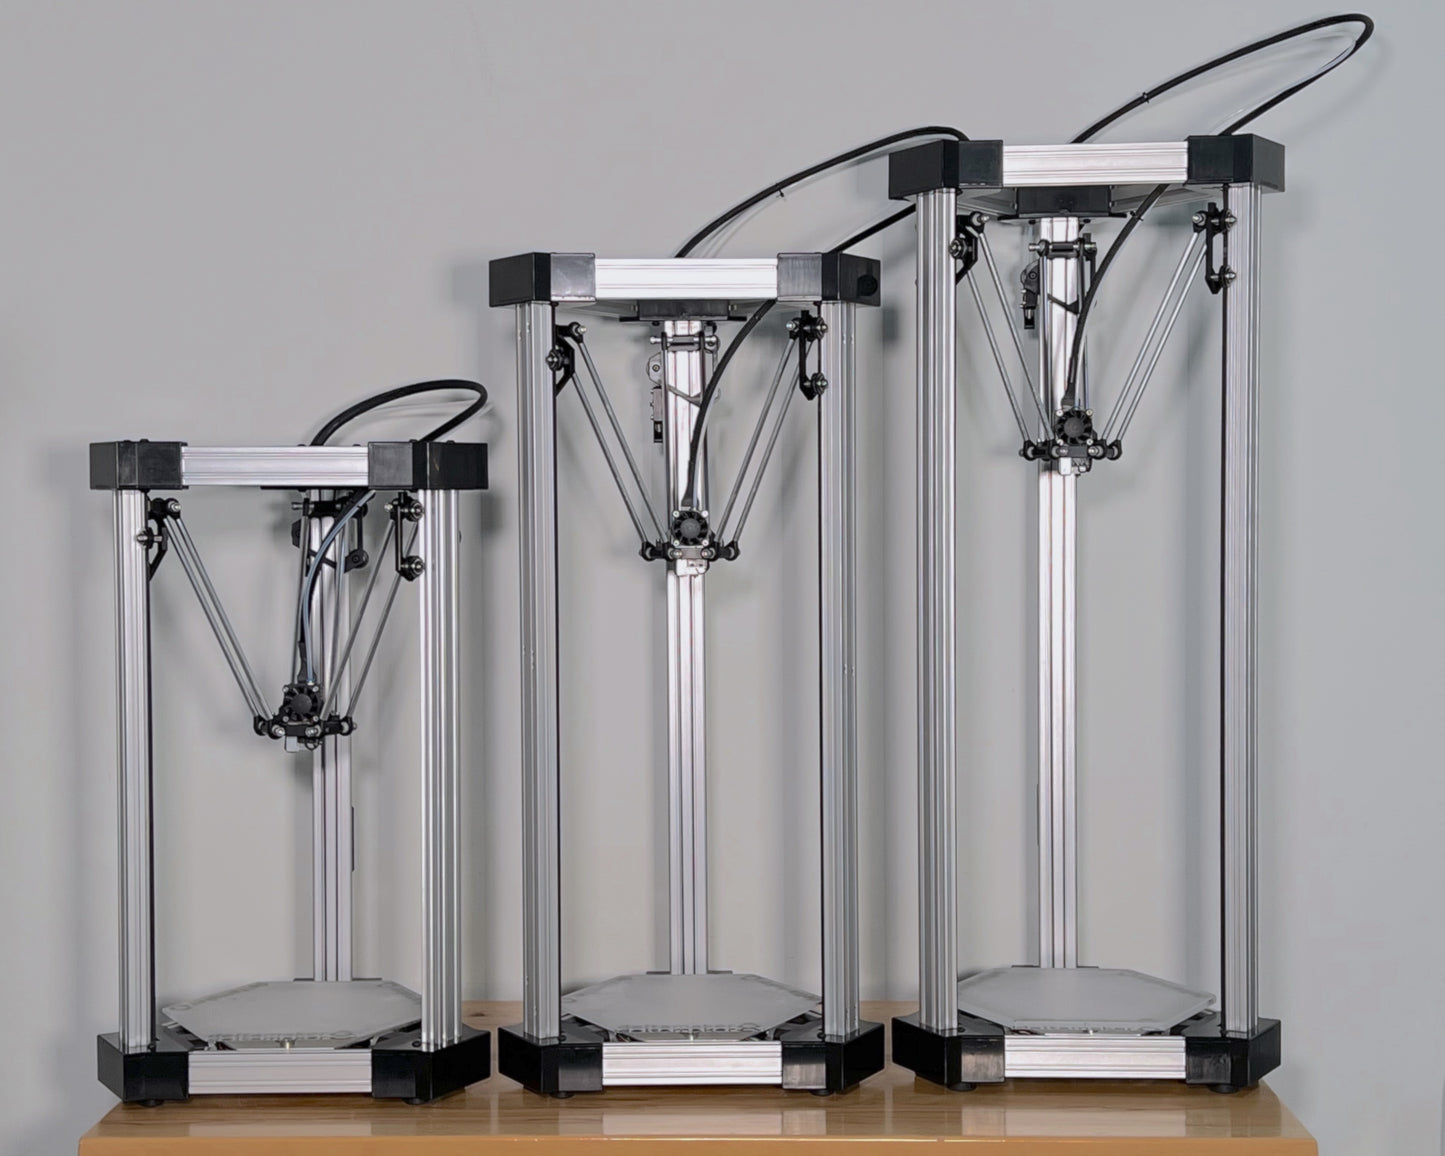 DeltaMaker 2: Professionally-crafted 3D printer for education, home, and business